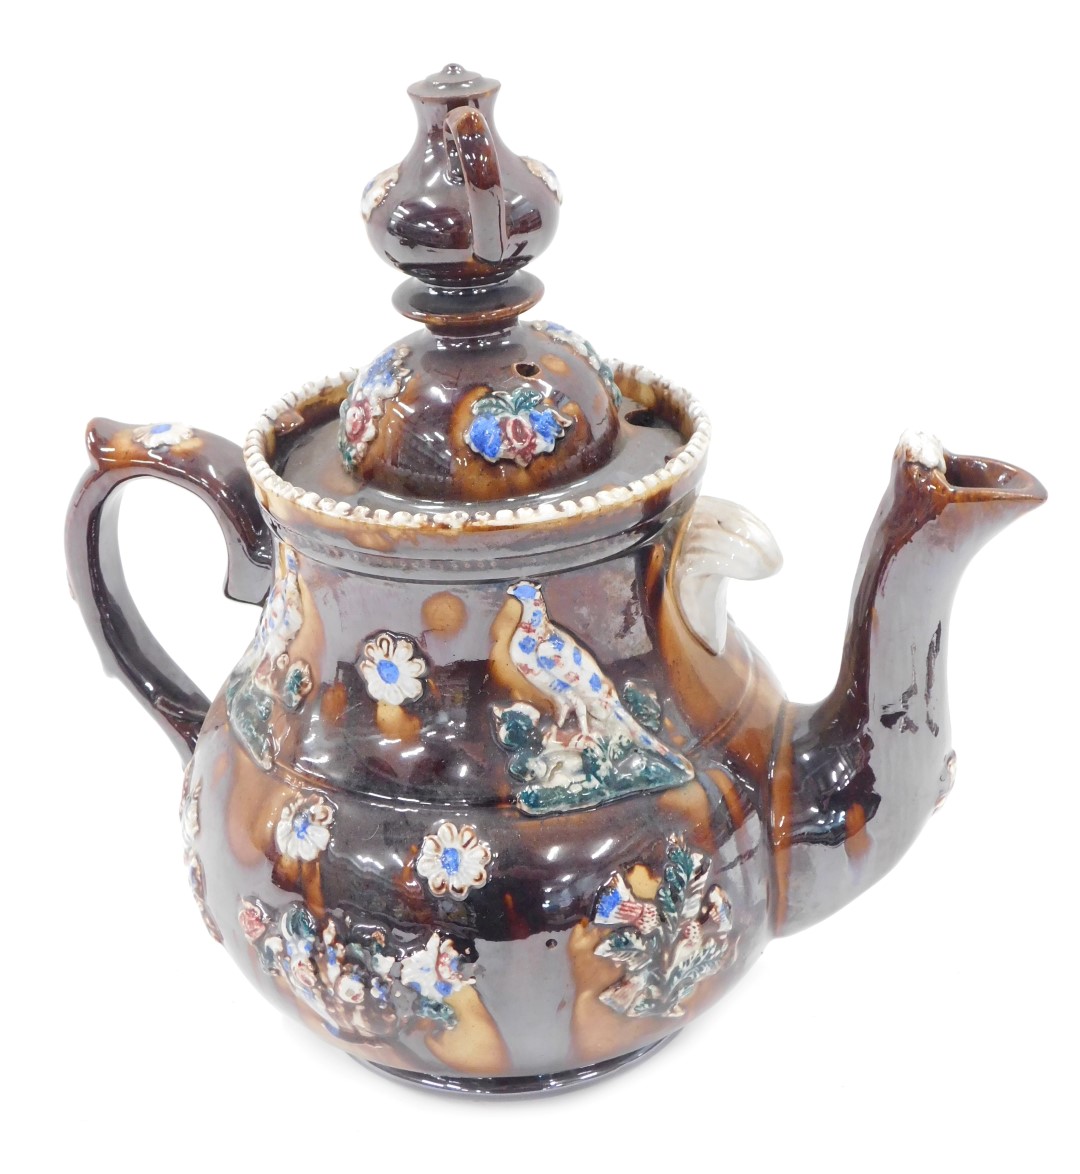 A Bargeware teapot, with typical treacle glazed decoration and presentation plaque Presented by Will